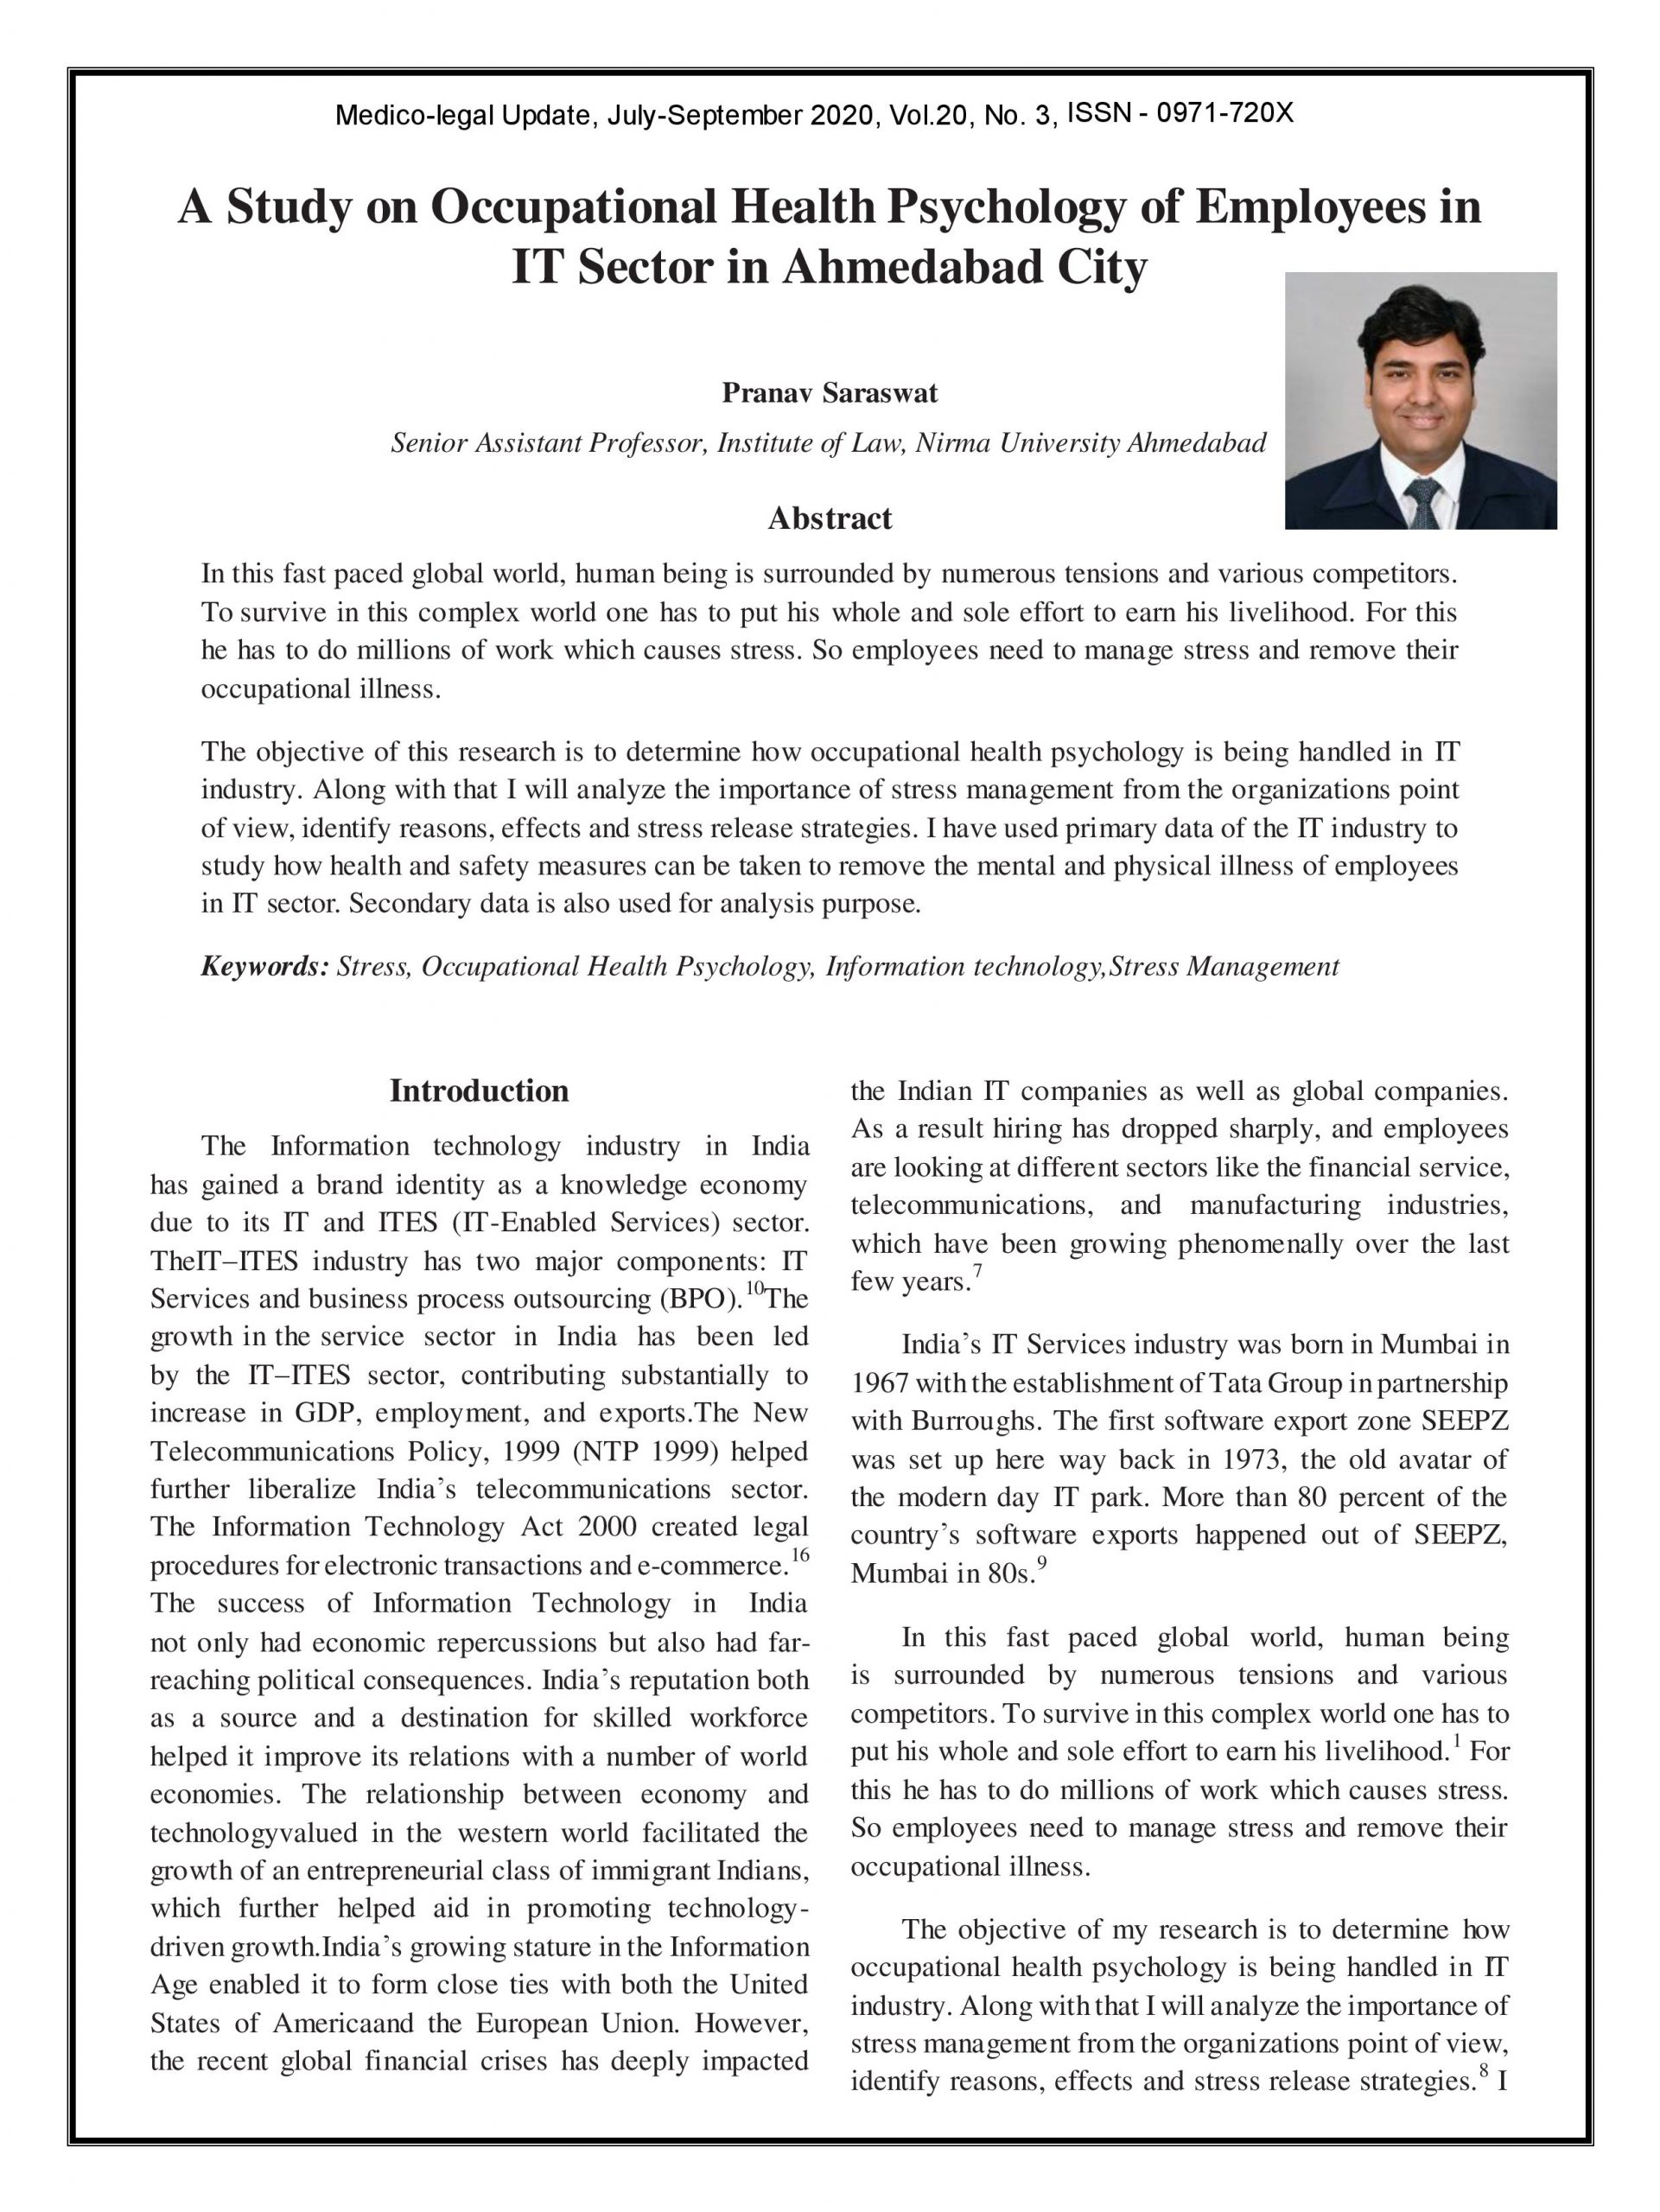 A Study on Occupational Health Psychology of Employees in the IT sector in Ahmedabad City